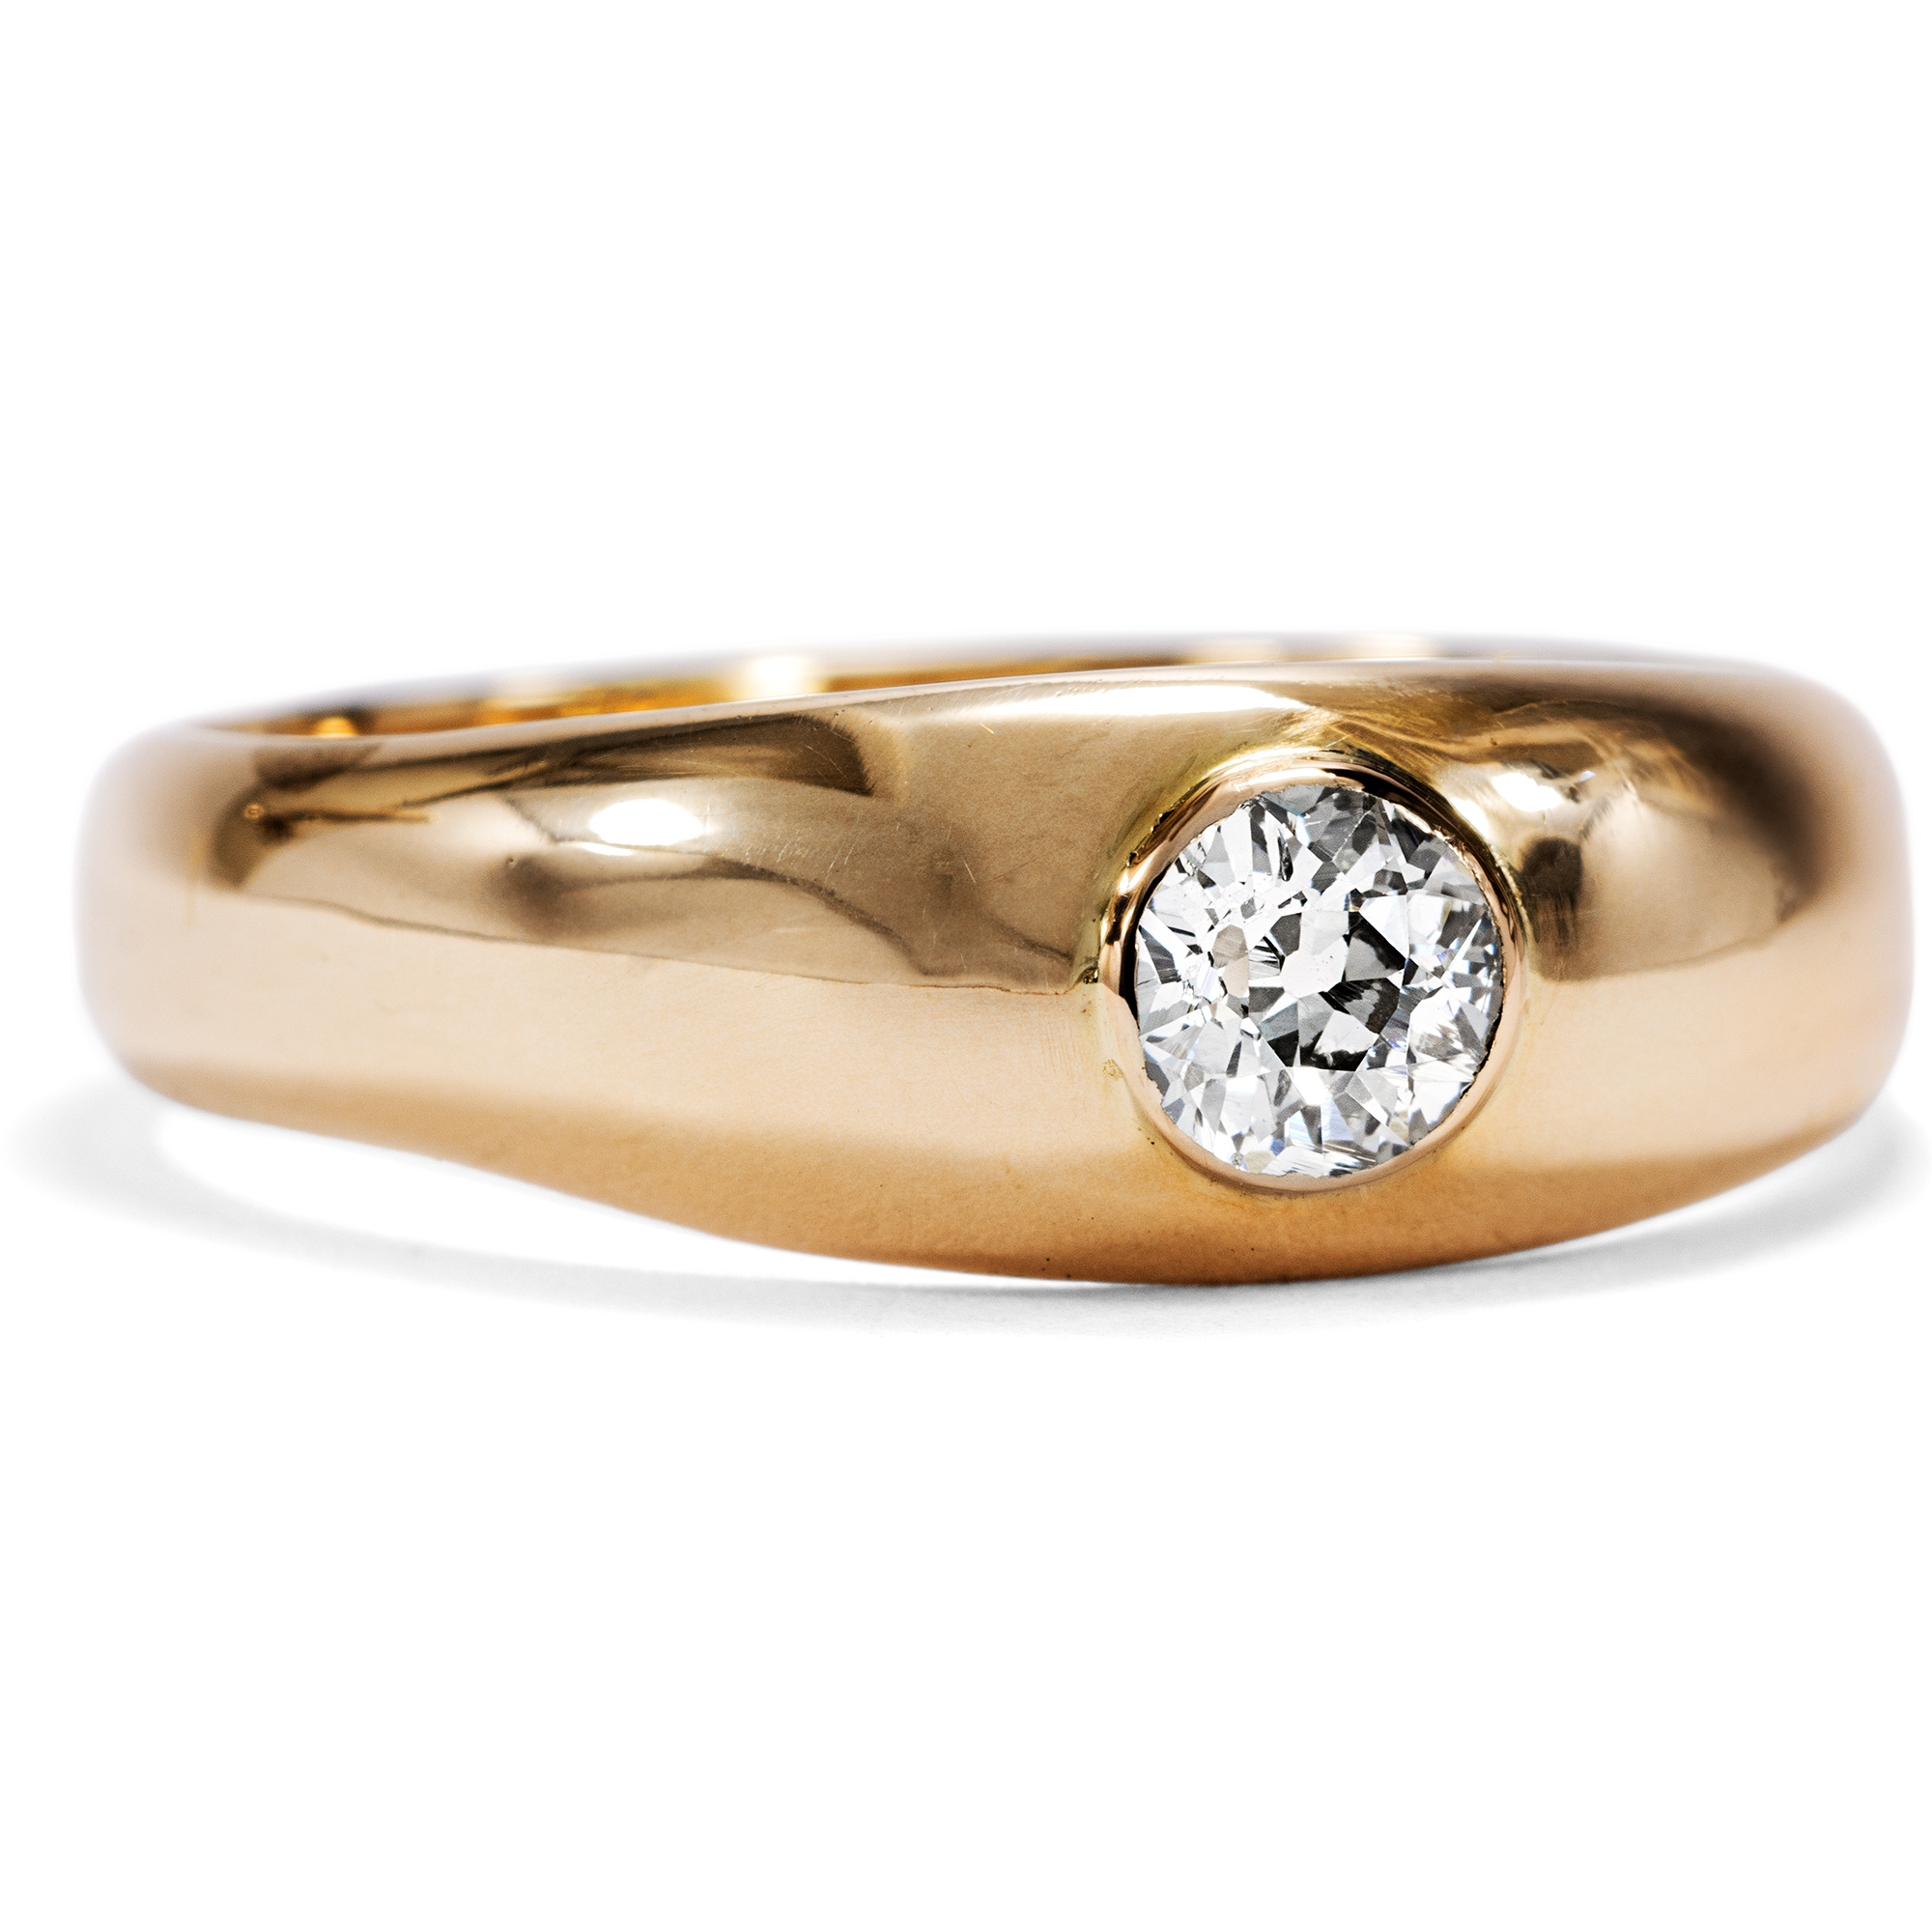 Classic Rose Gold Band Ring with Old Cut Diamond, c. 1900